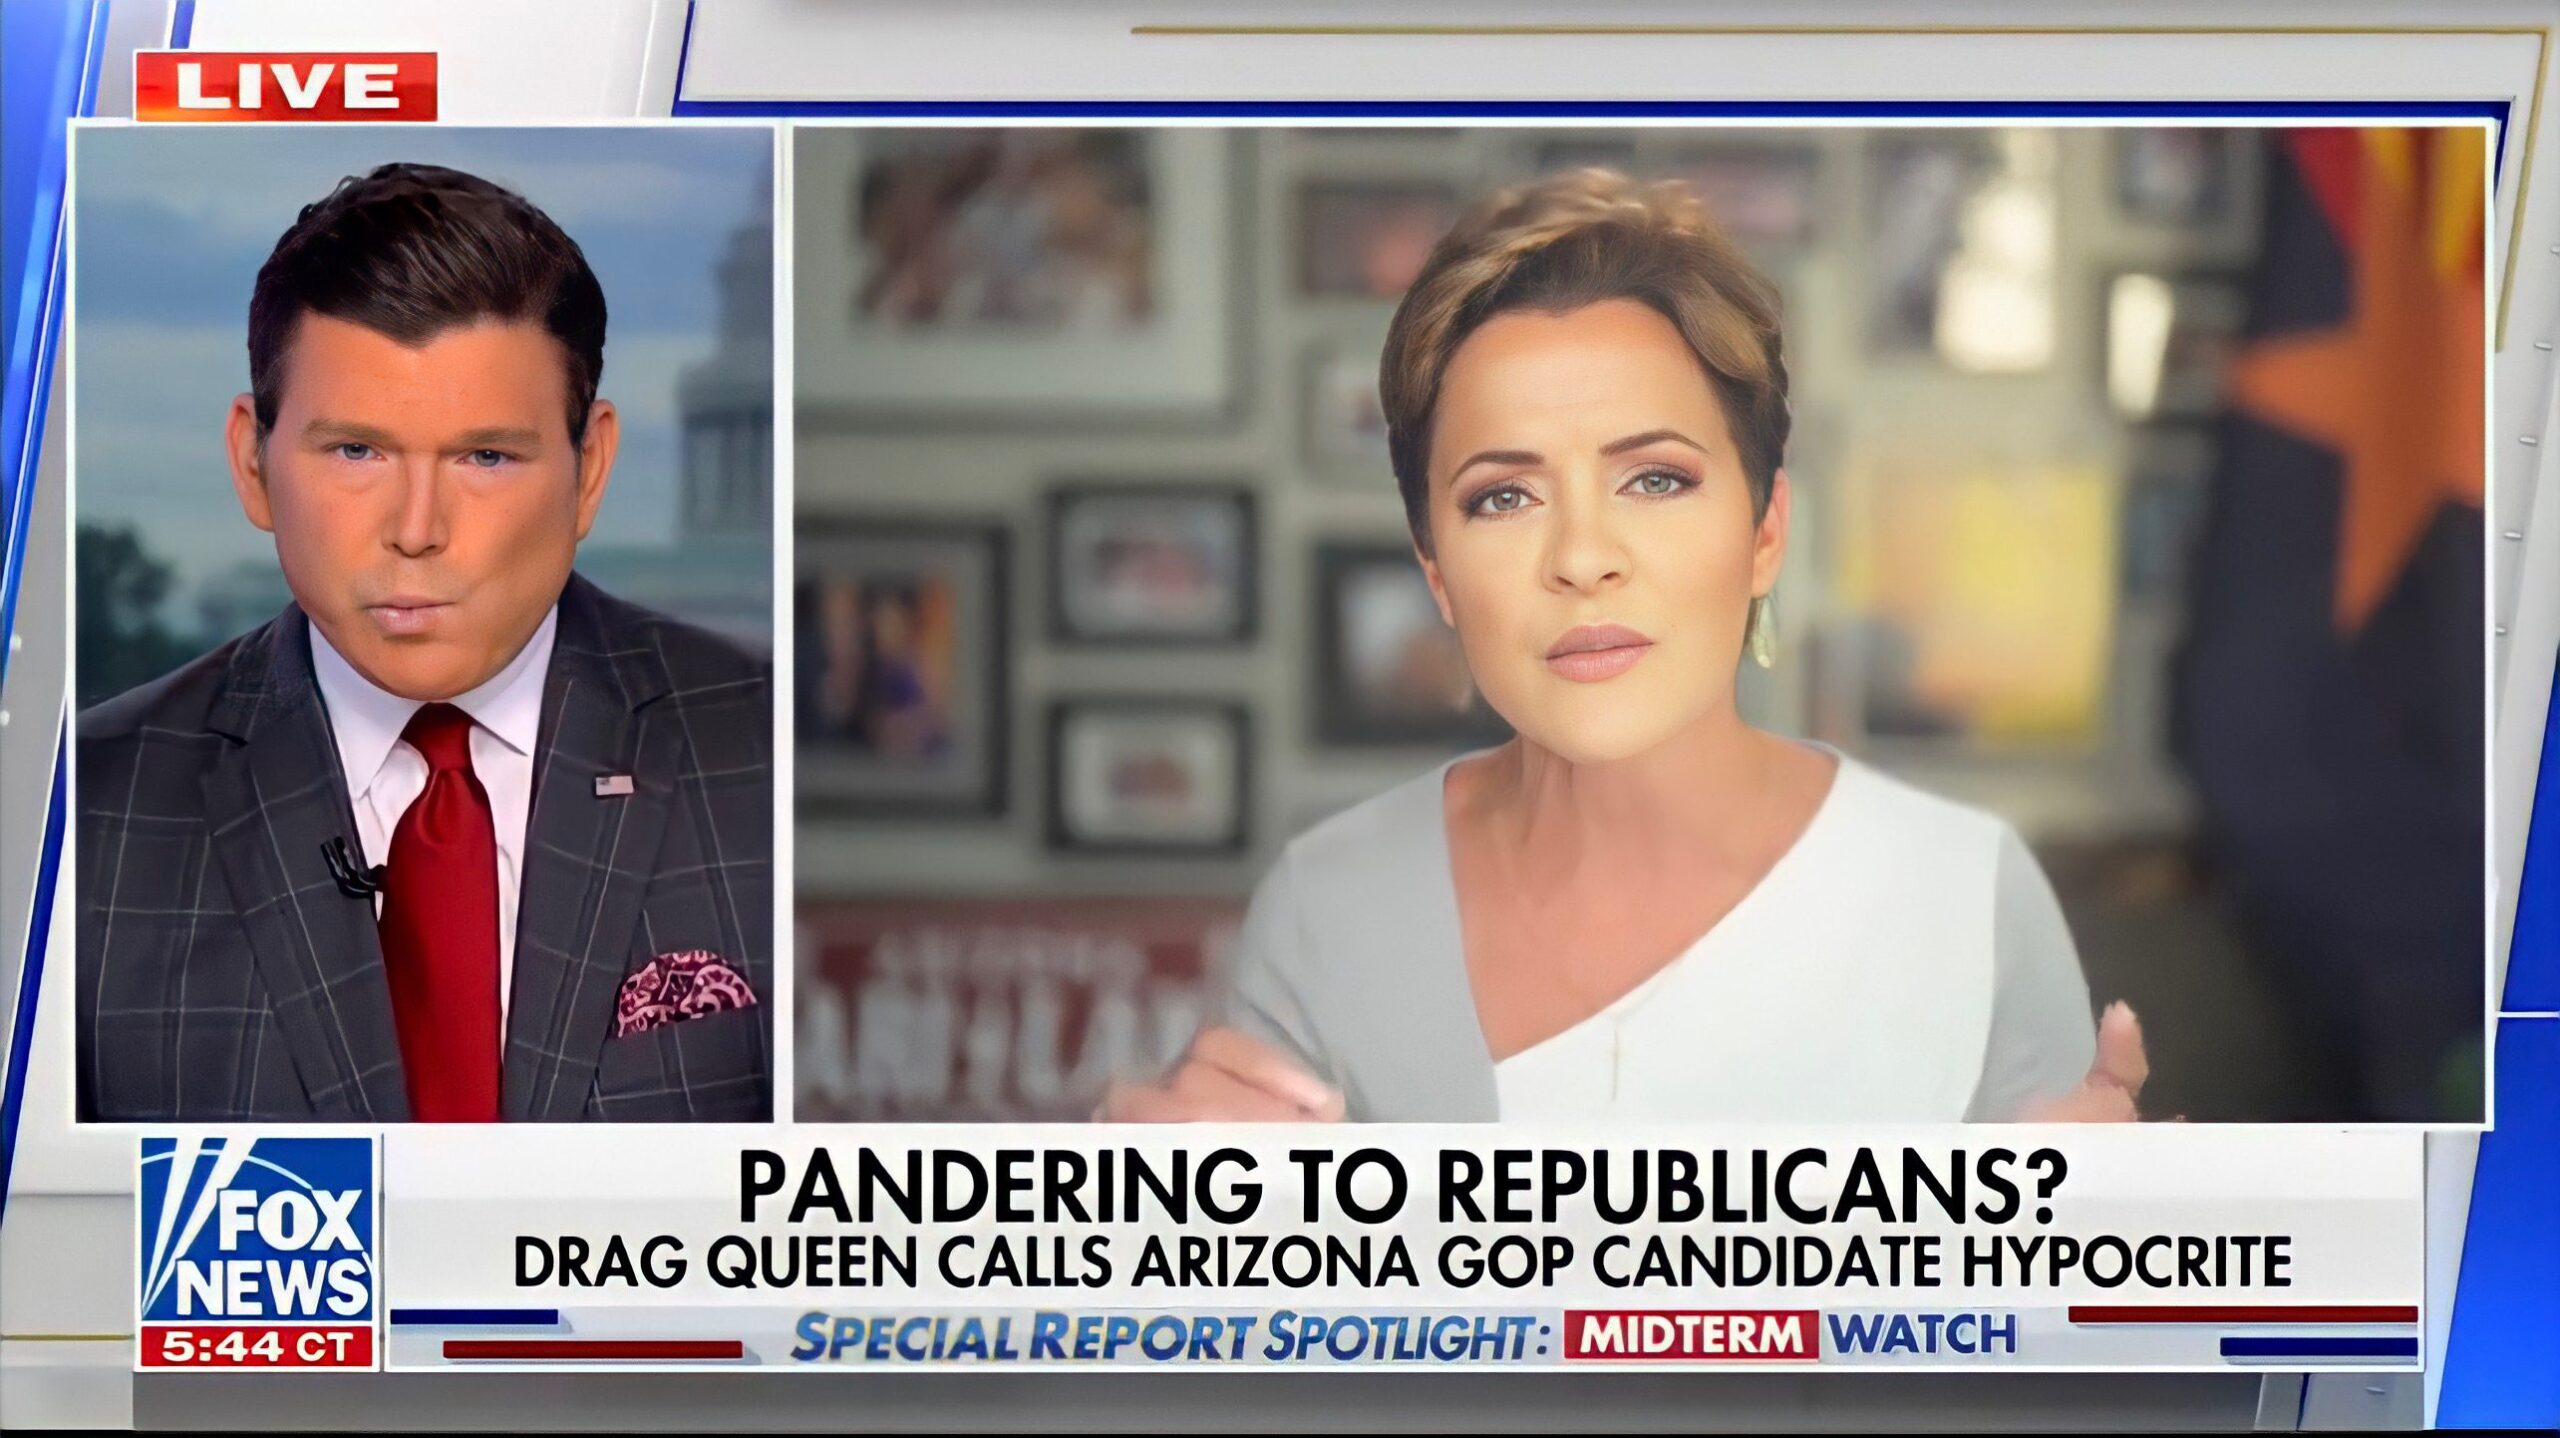 BOOM! Kari Lake INCINERATES Bret Baier and FOX News for Pushing FAKE STORY on AZ Drag Queen …“I Am Really Disappointed in FOX, I Thought You Were Better Than CNN!”